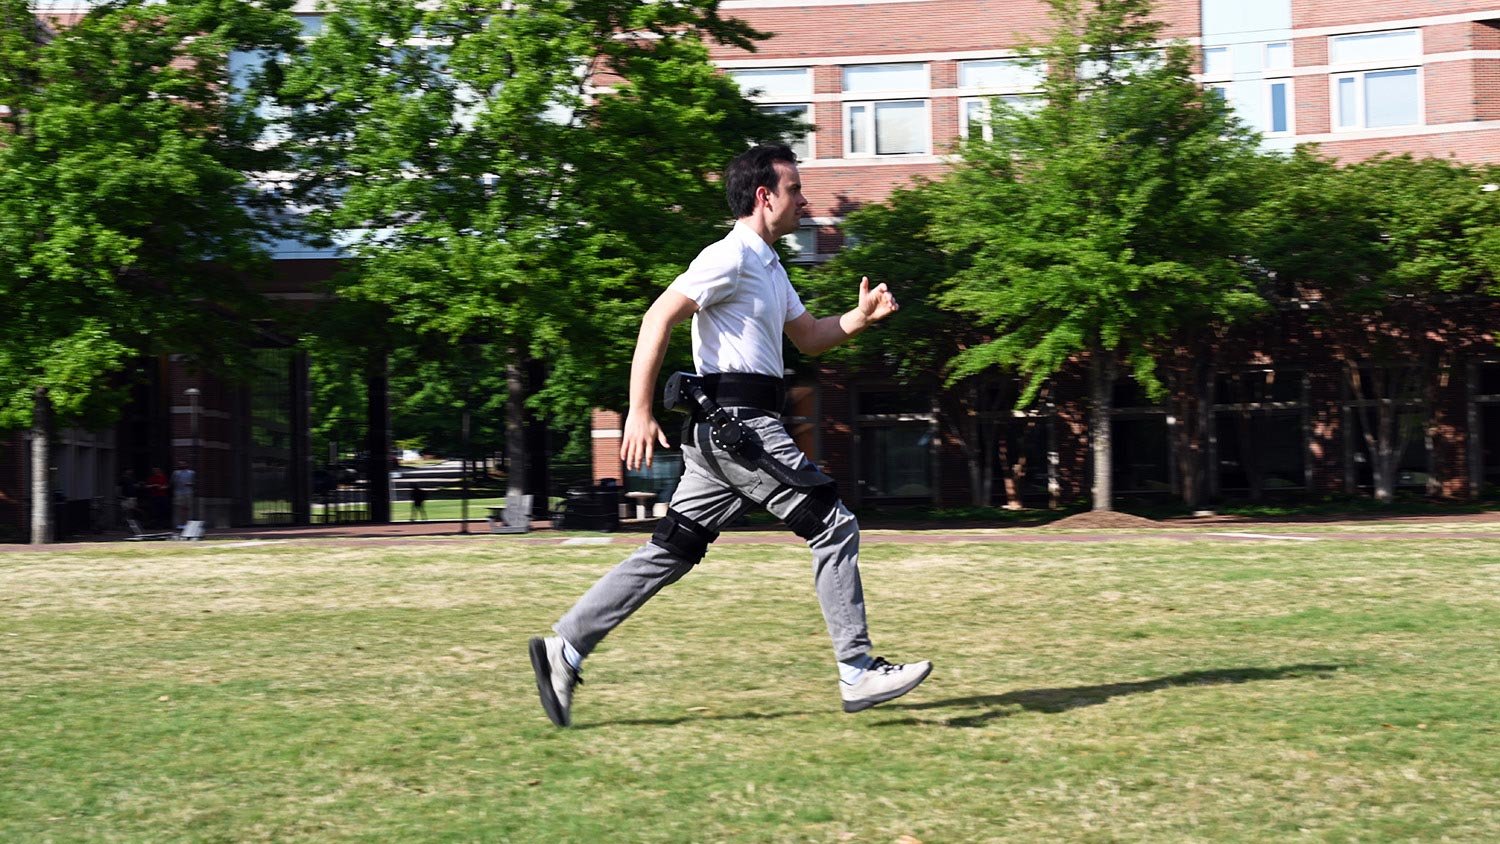 Robotic Suits That Help You Run Easier and Faster